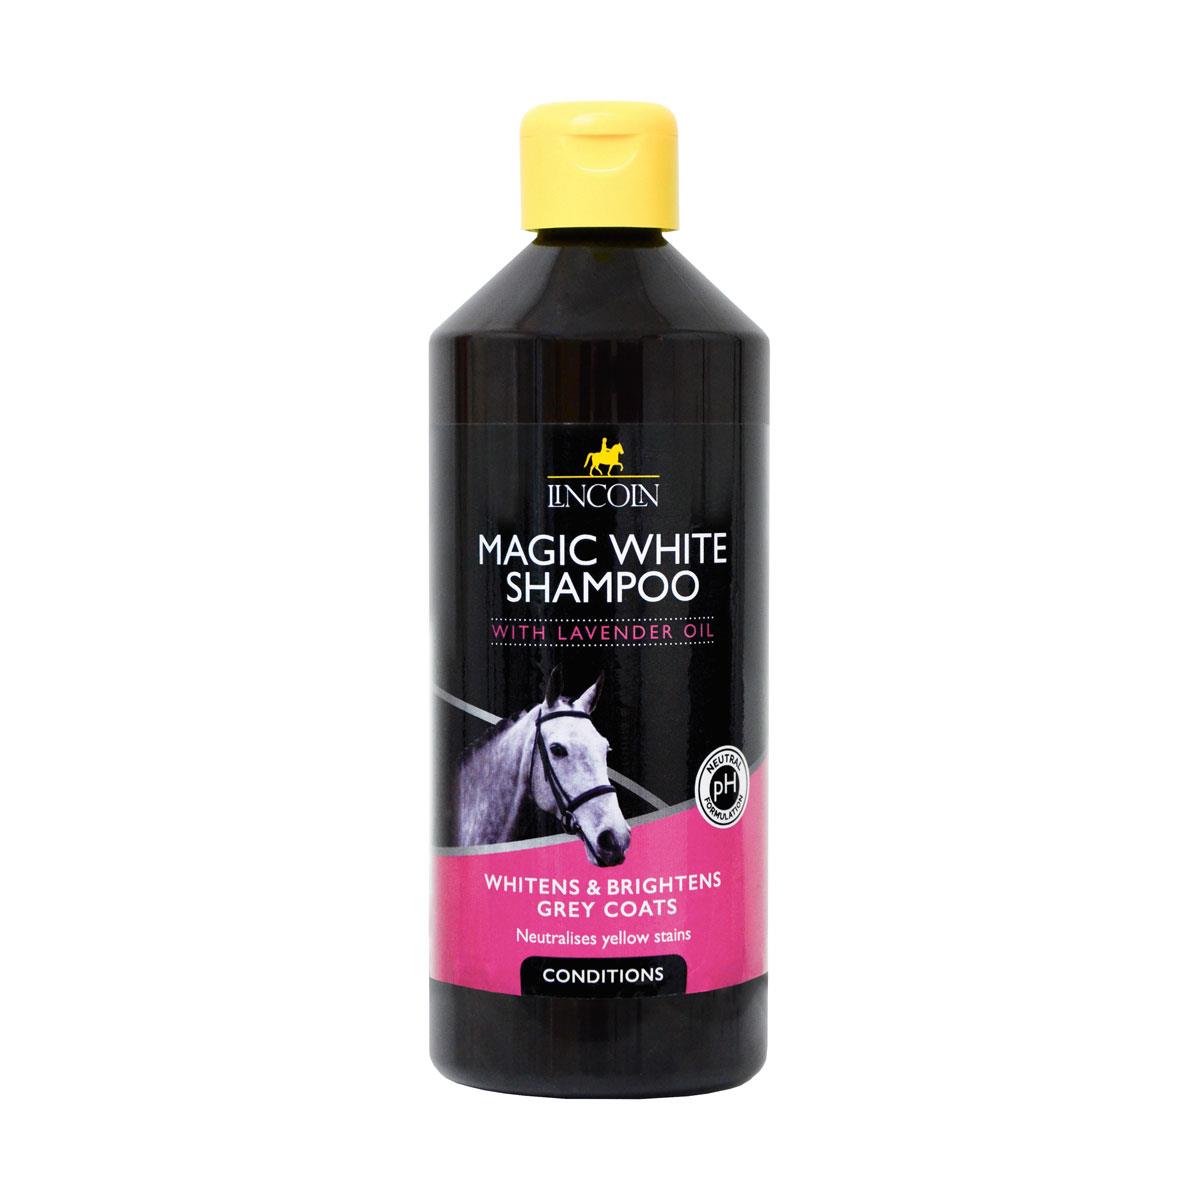 LINCOLN MAGIC WHITE HORSE SHAMPOO - Restore the natural brilliance of your horse's coat